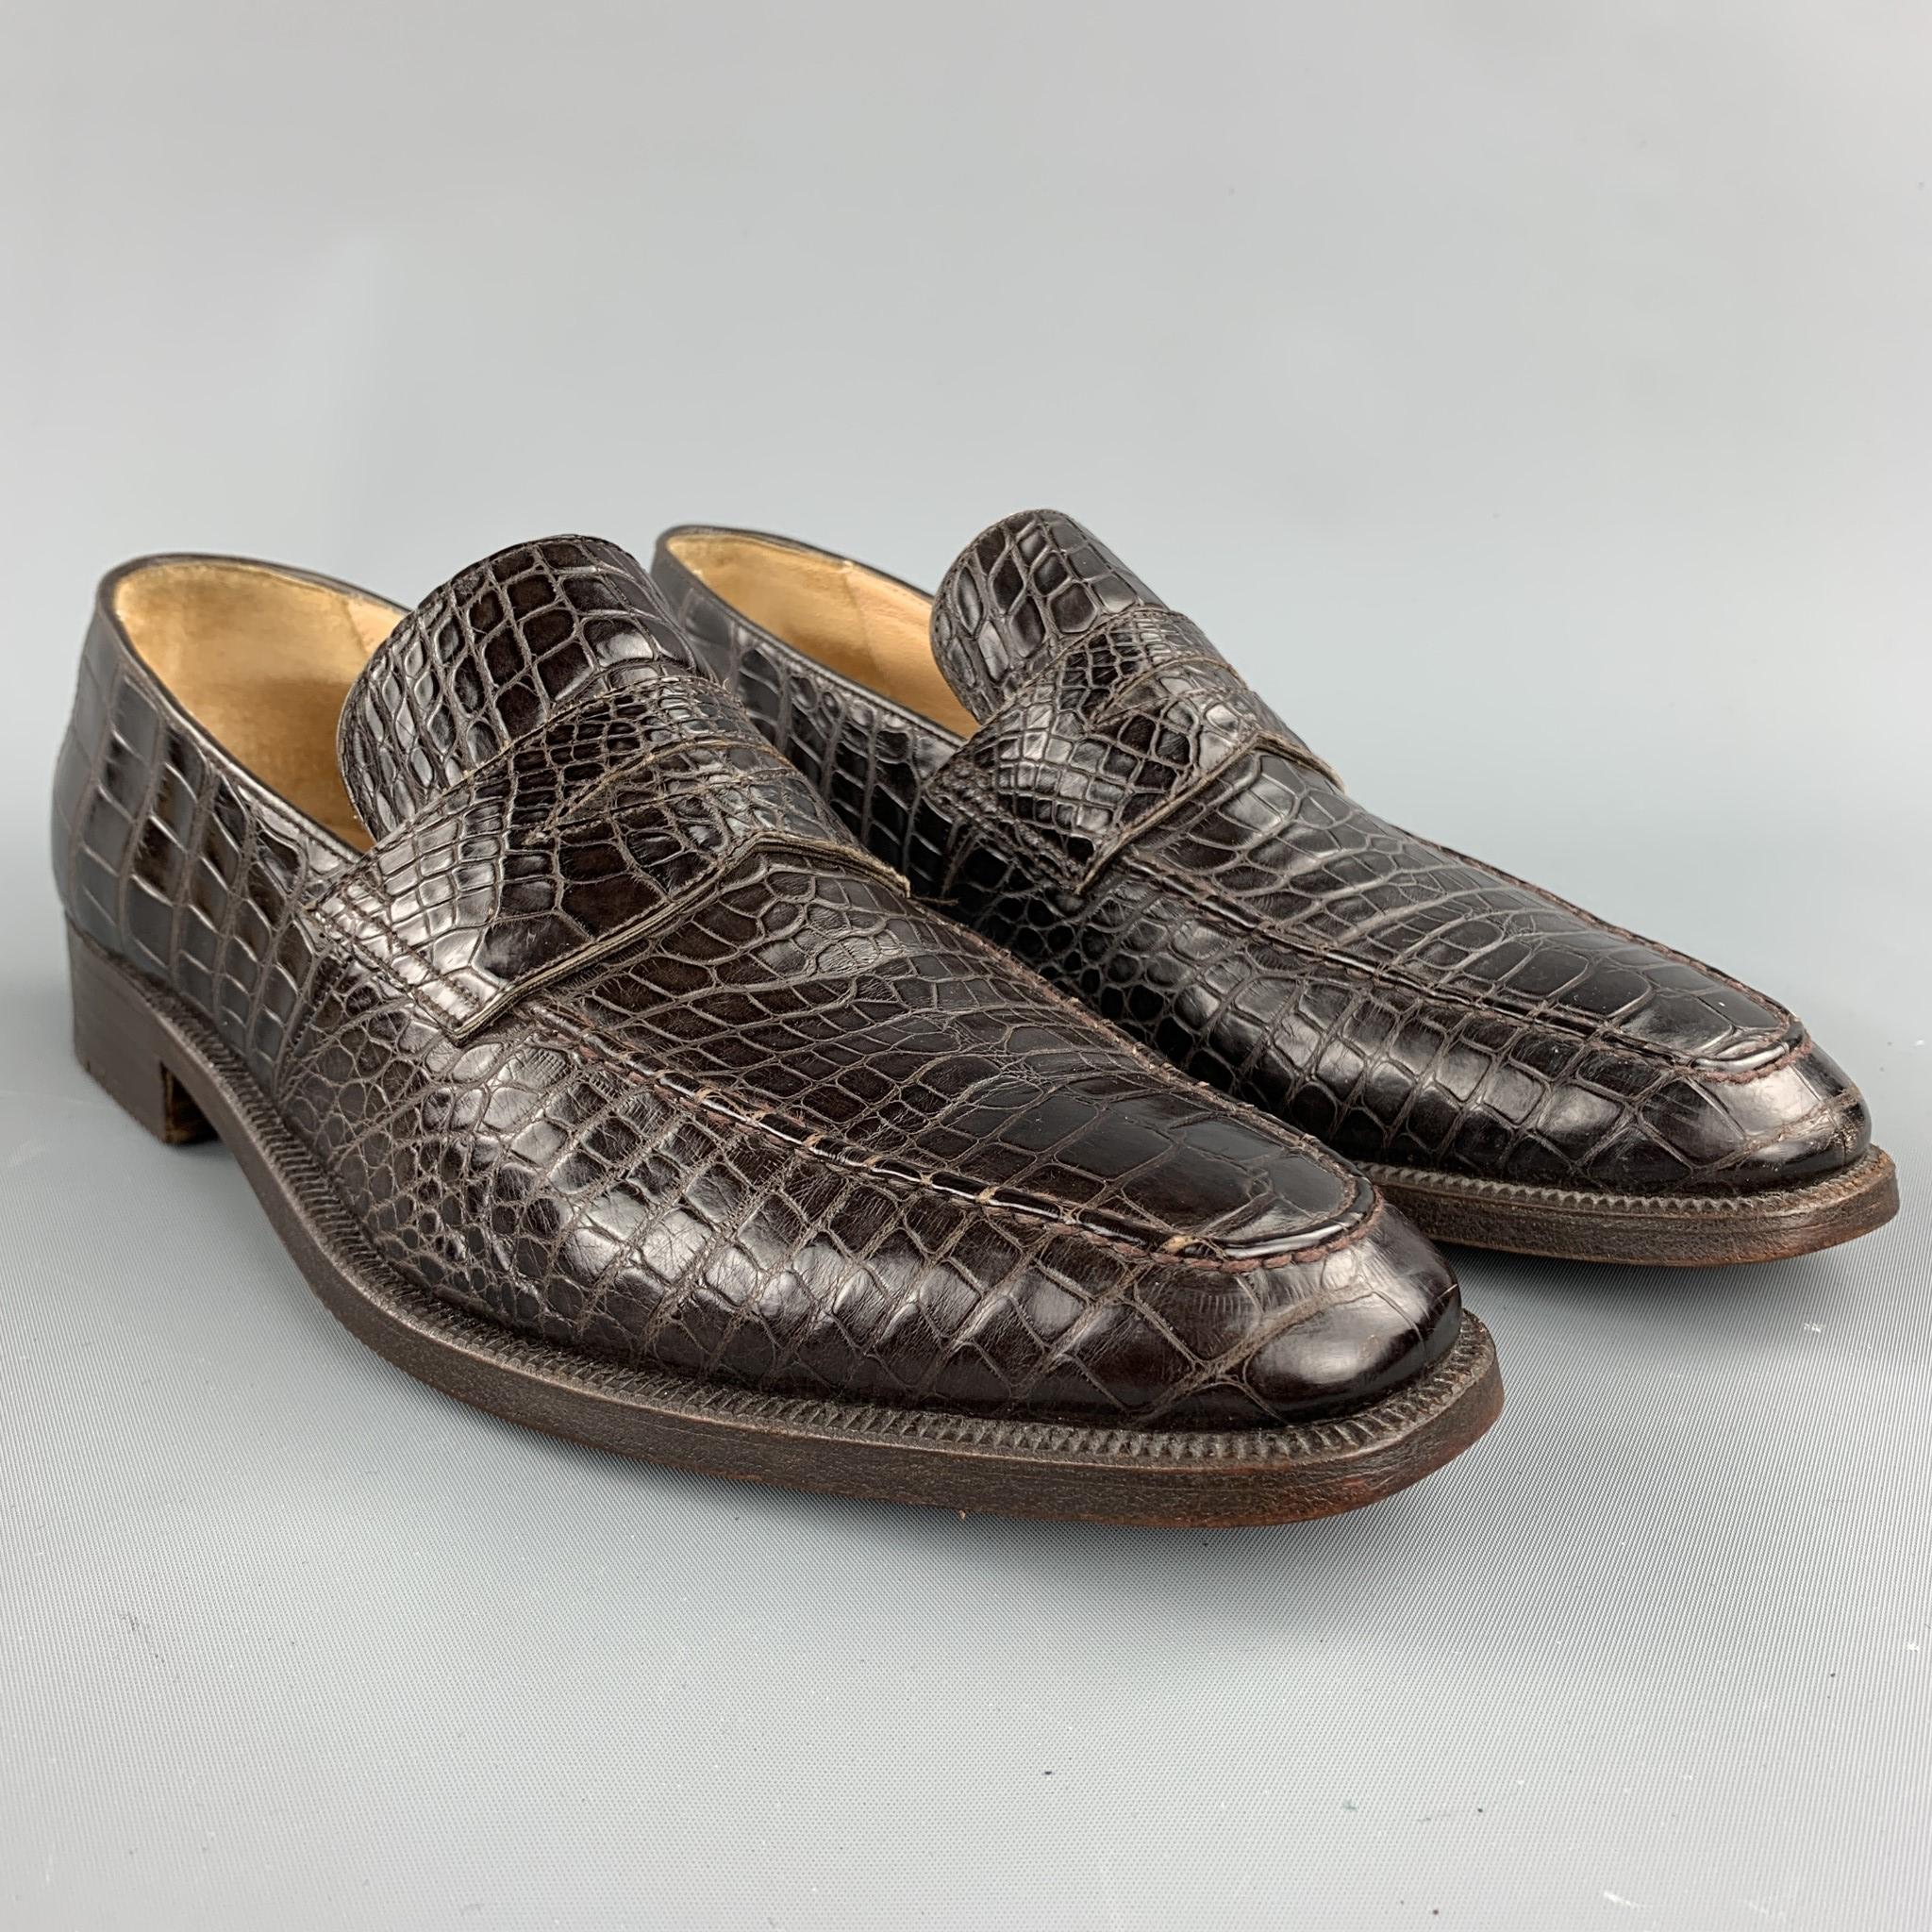 GRAVATI per WILSON AND DEAN for WILKES BASHFORD loafers comes in a brown textured crocodile featuring a penny strap and a wooden sole. Made in Italy.

Excellent Pre-Owned Condition.
Marked: 8.5 M 

Outsole:

11.5 in. x 4 in. 

